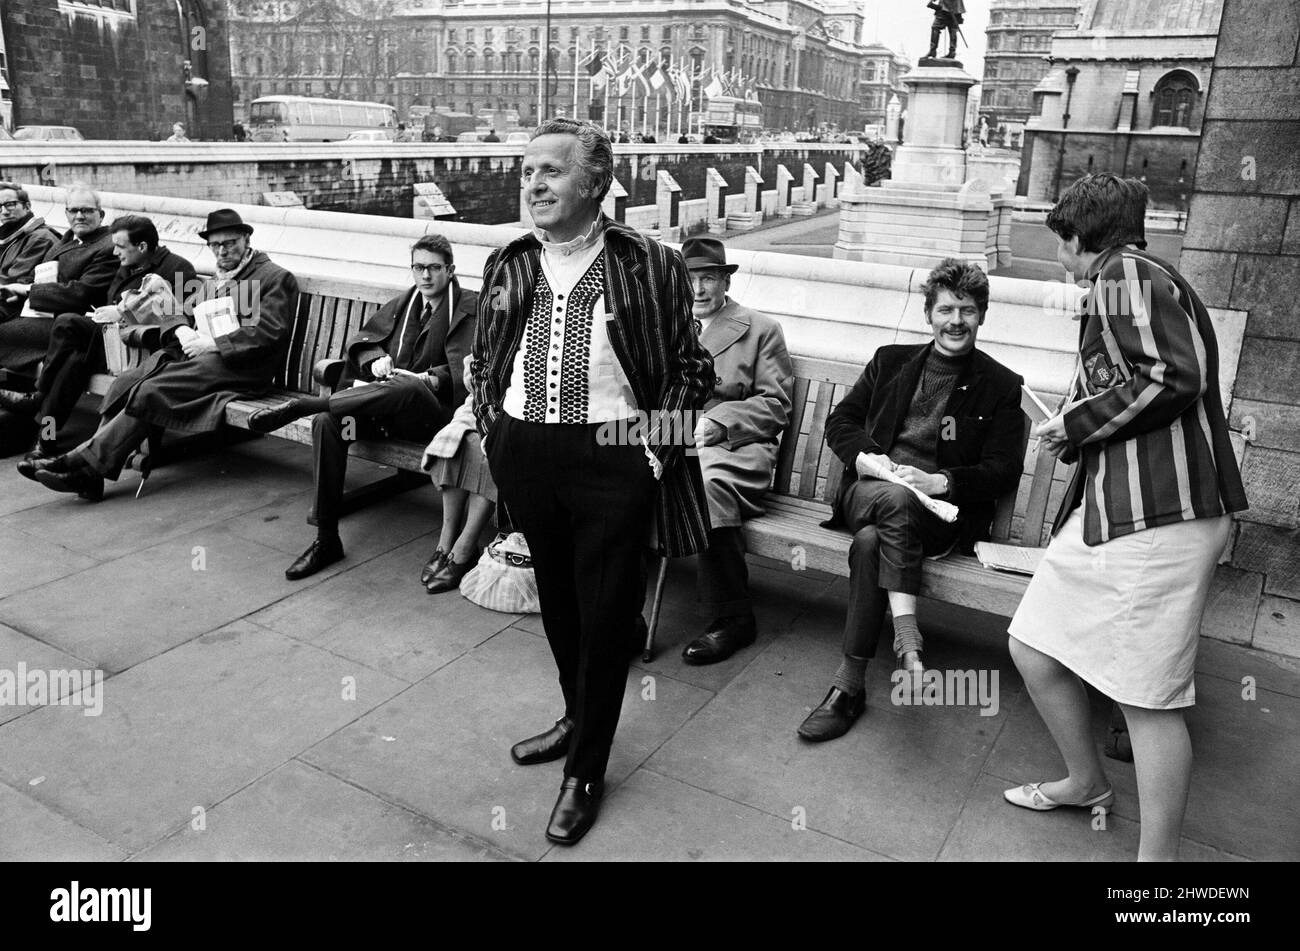 Leo Abse pictured wearing his budget day suit made of Welsh tweed. 15th April 1969. Stock Photo